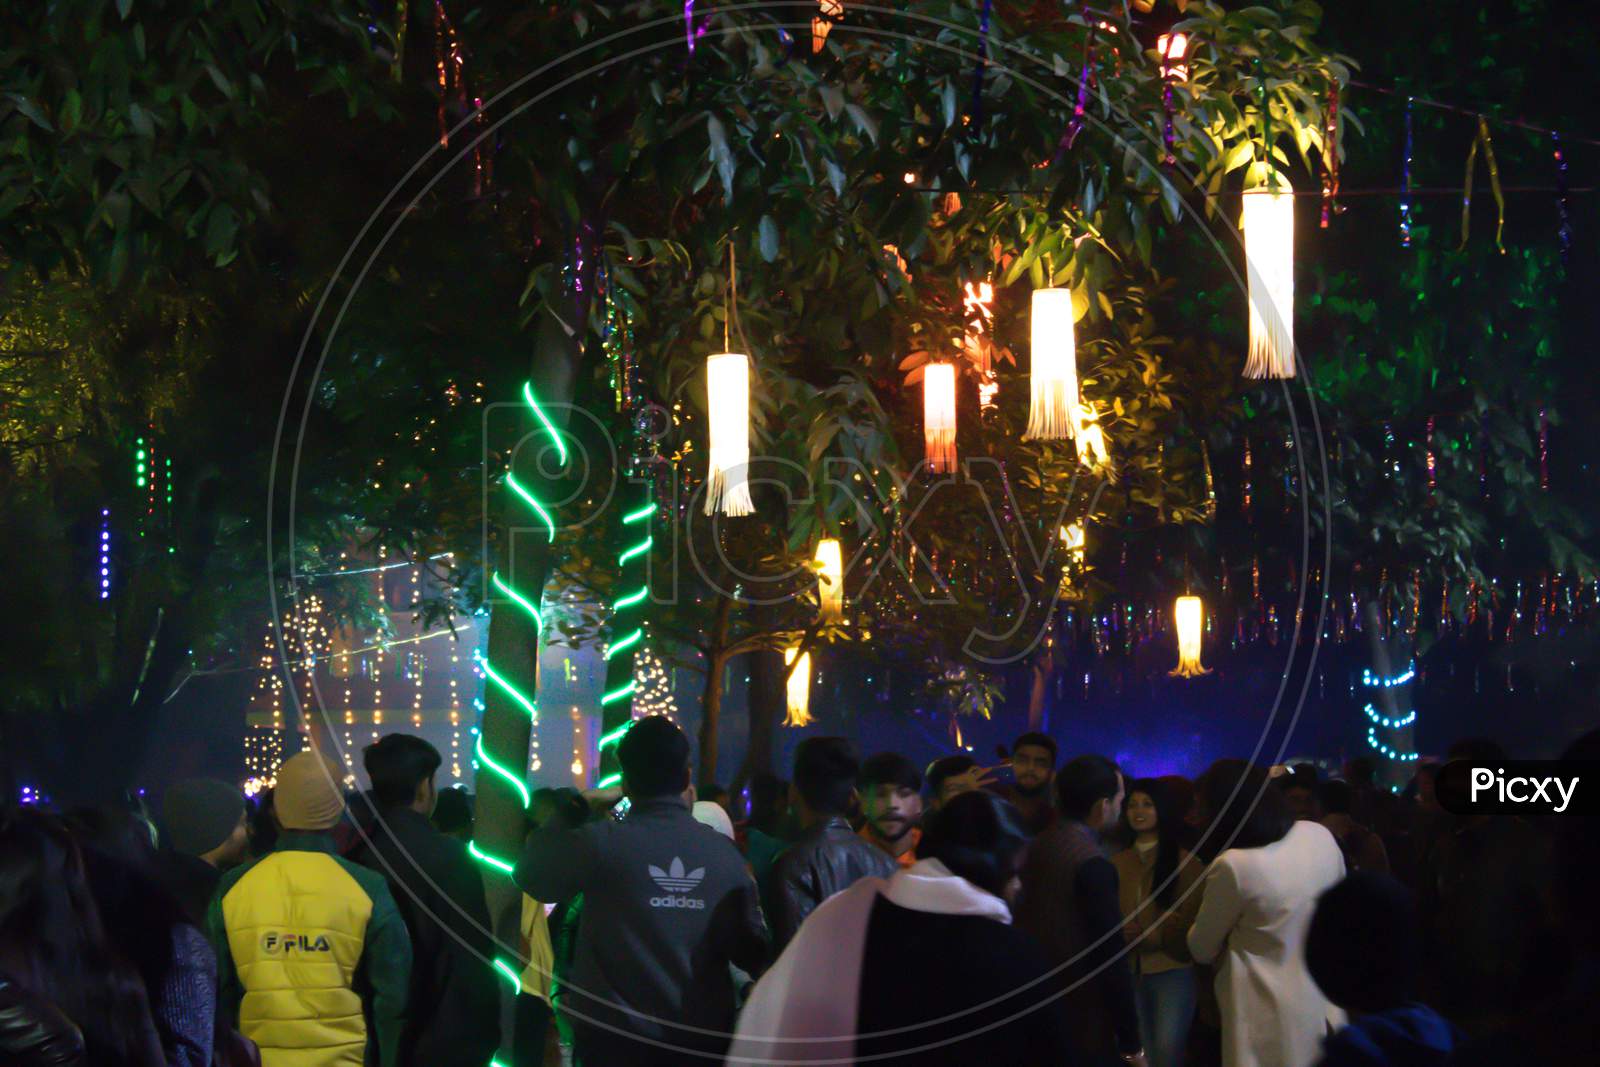 Party decoration with light and lamps